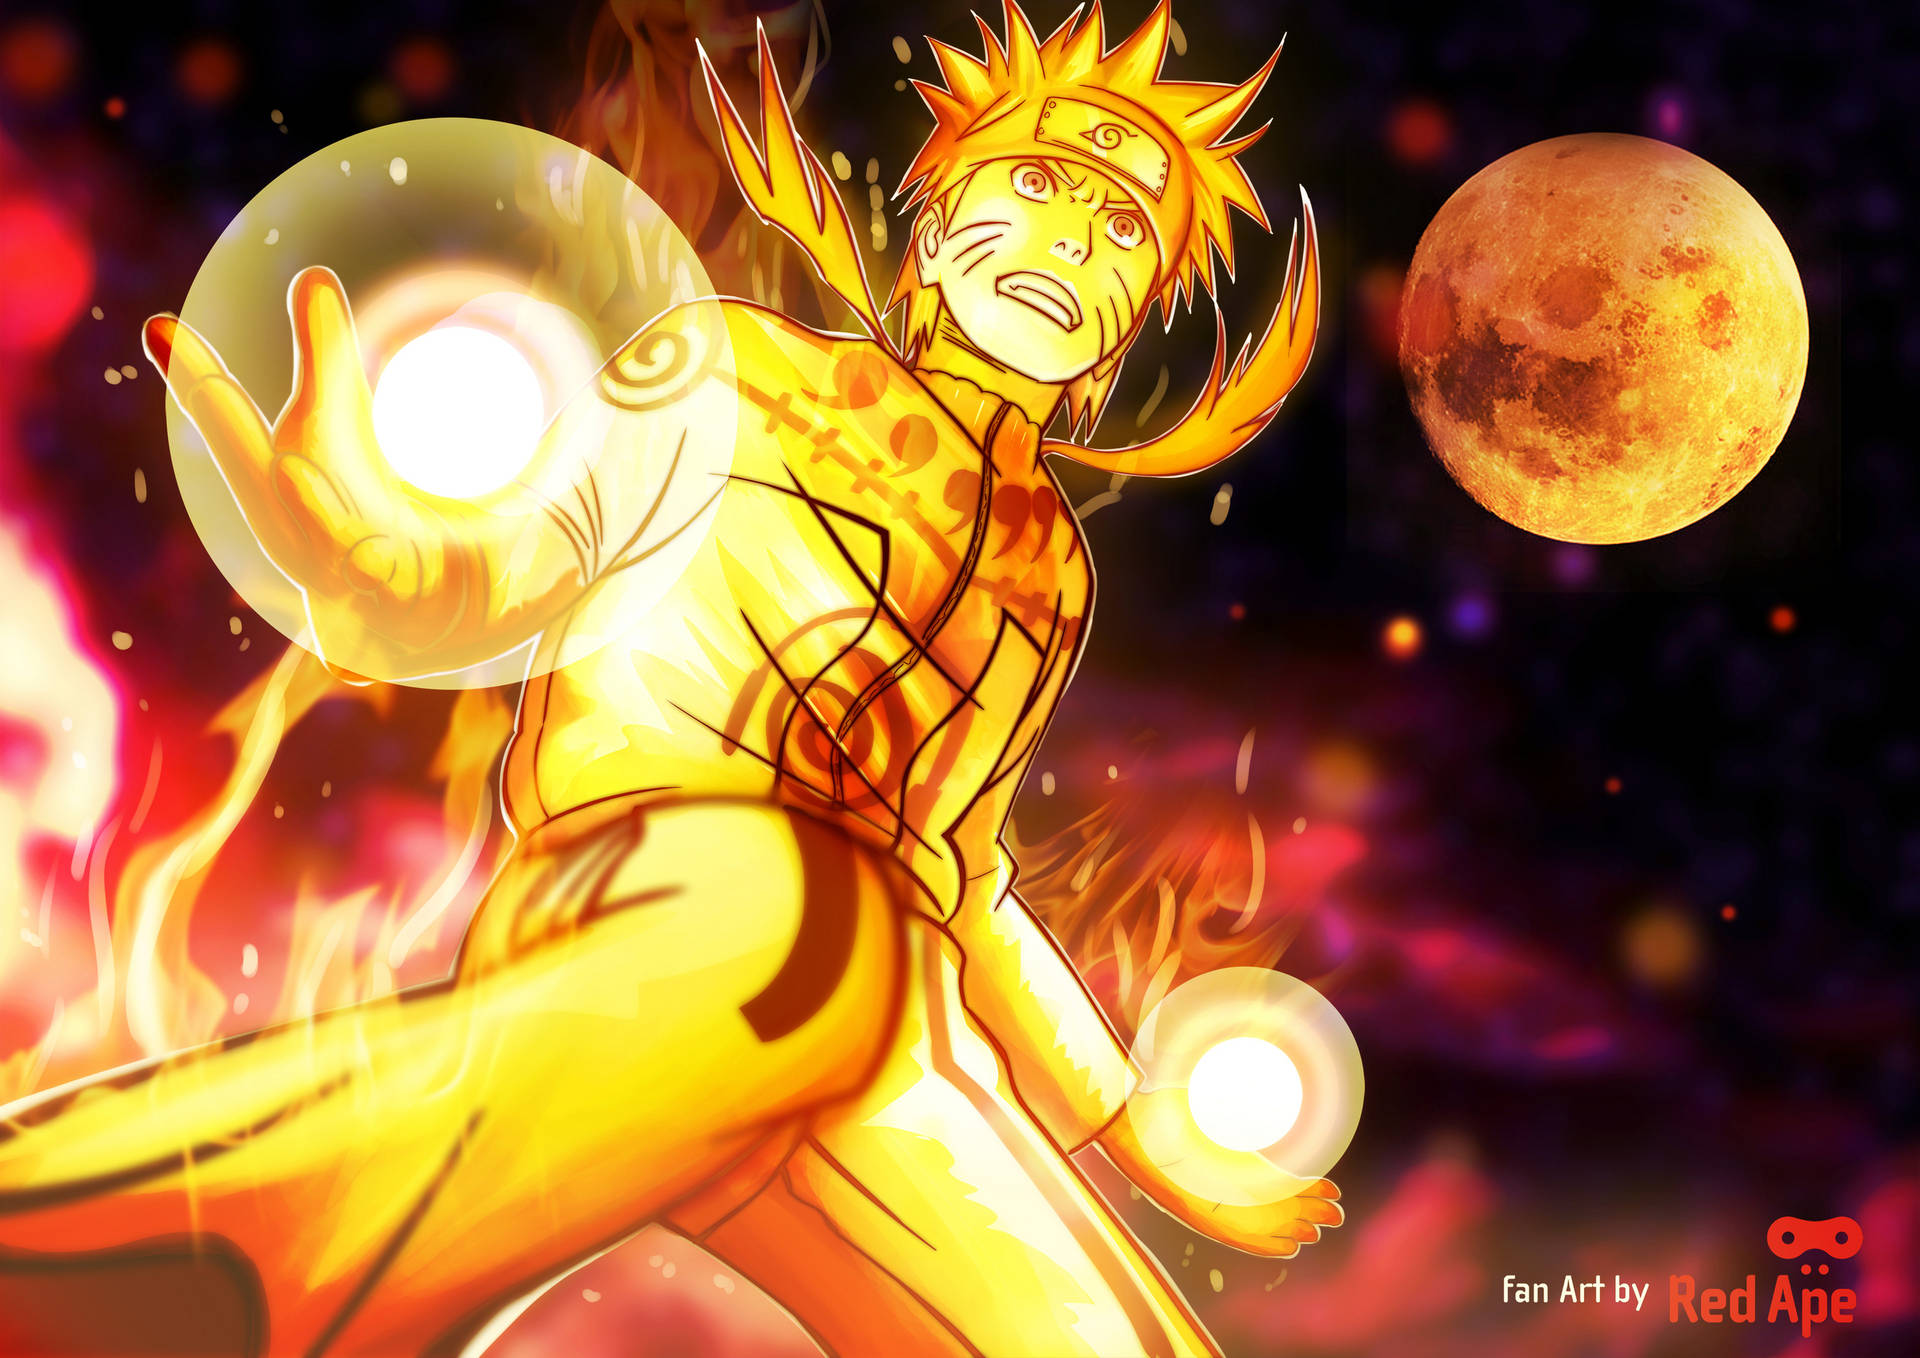 Naruto in his Final Form ready to save the world Wallpaper